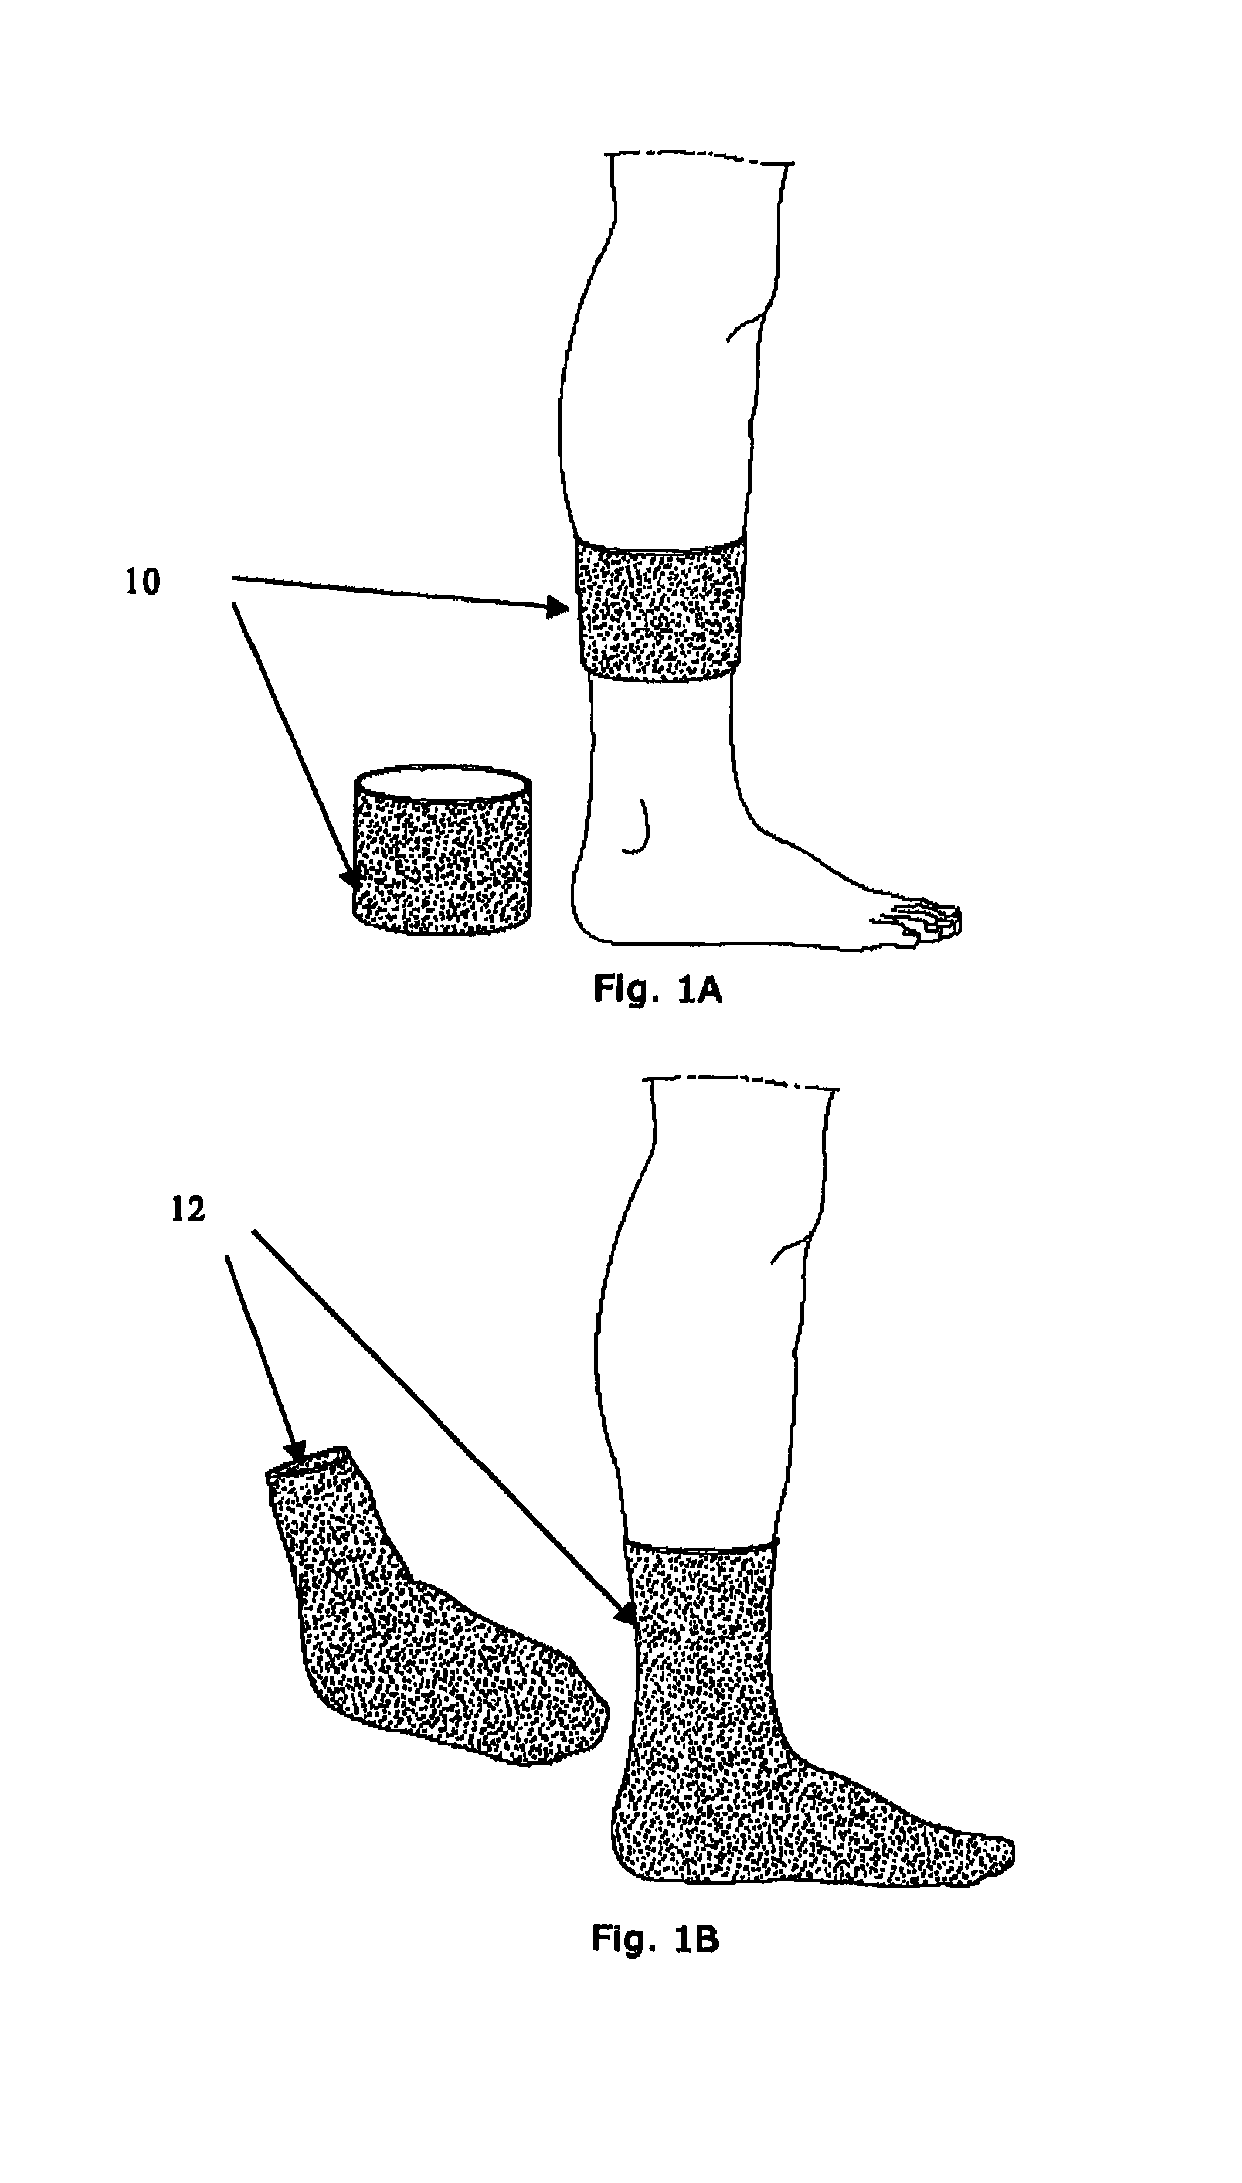 Device, method, and use for treatment of neuropathy involving nitric oxide